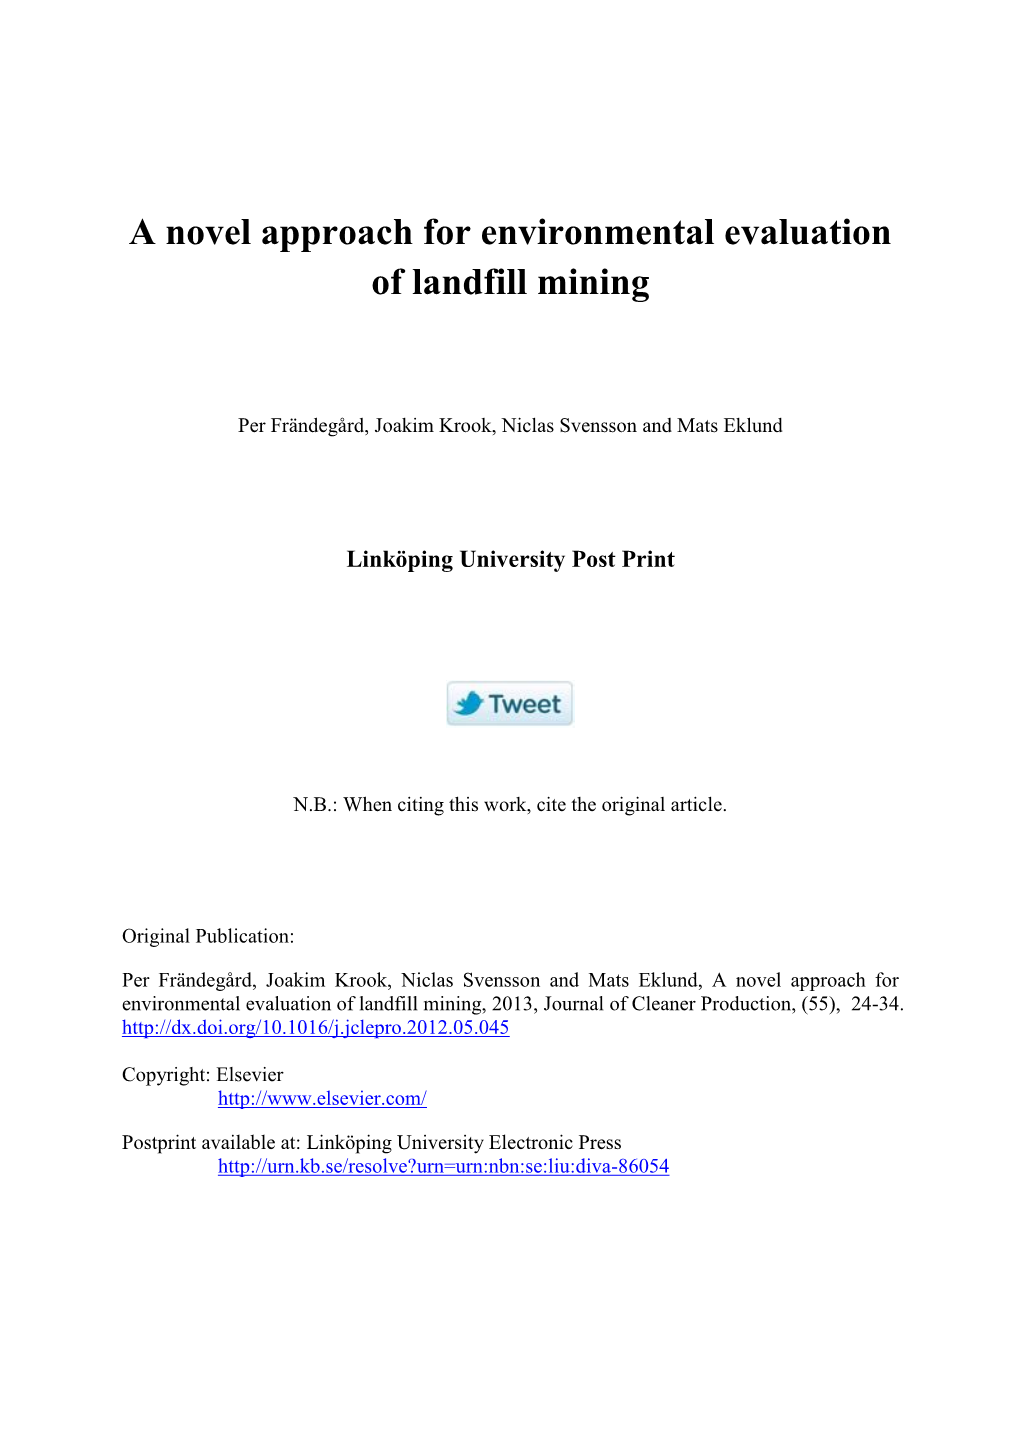 A Novel Approach for Environmental Evaluation of Landfill Mining